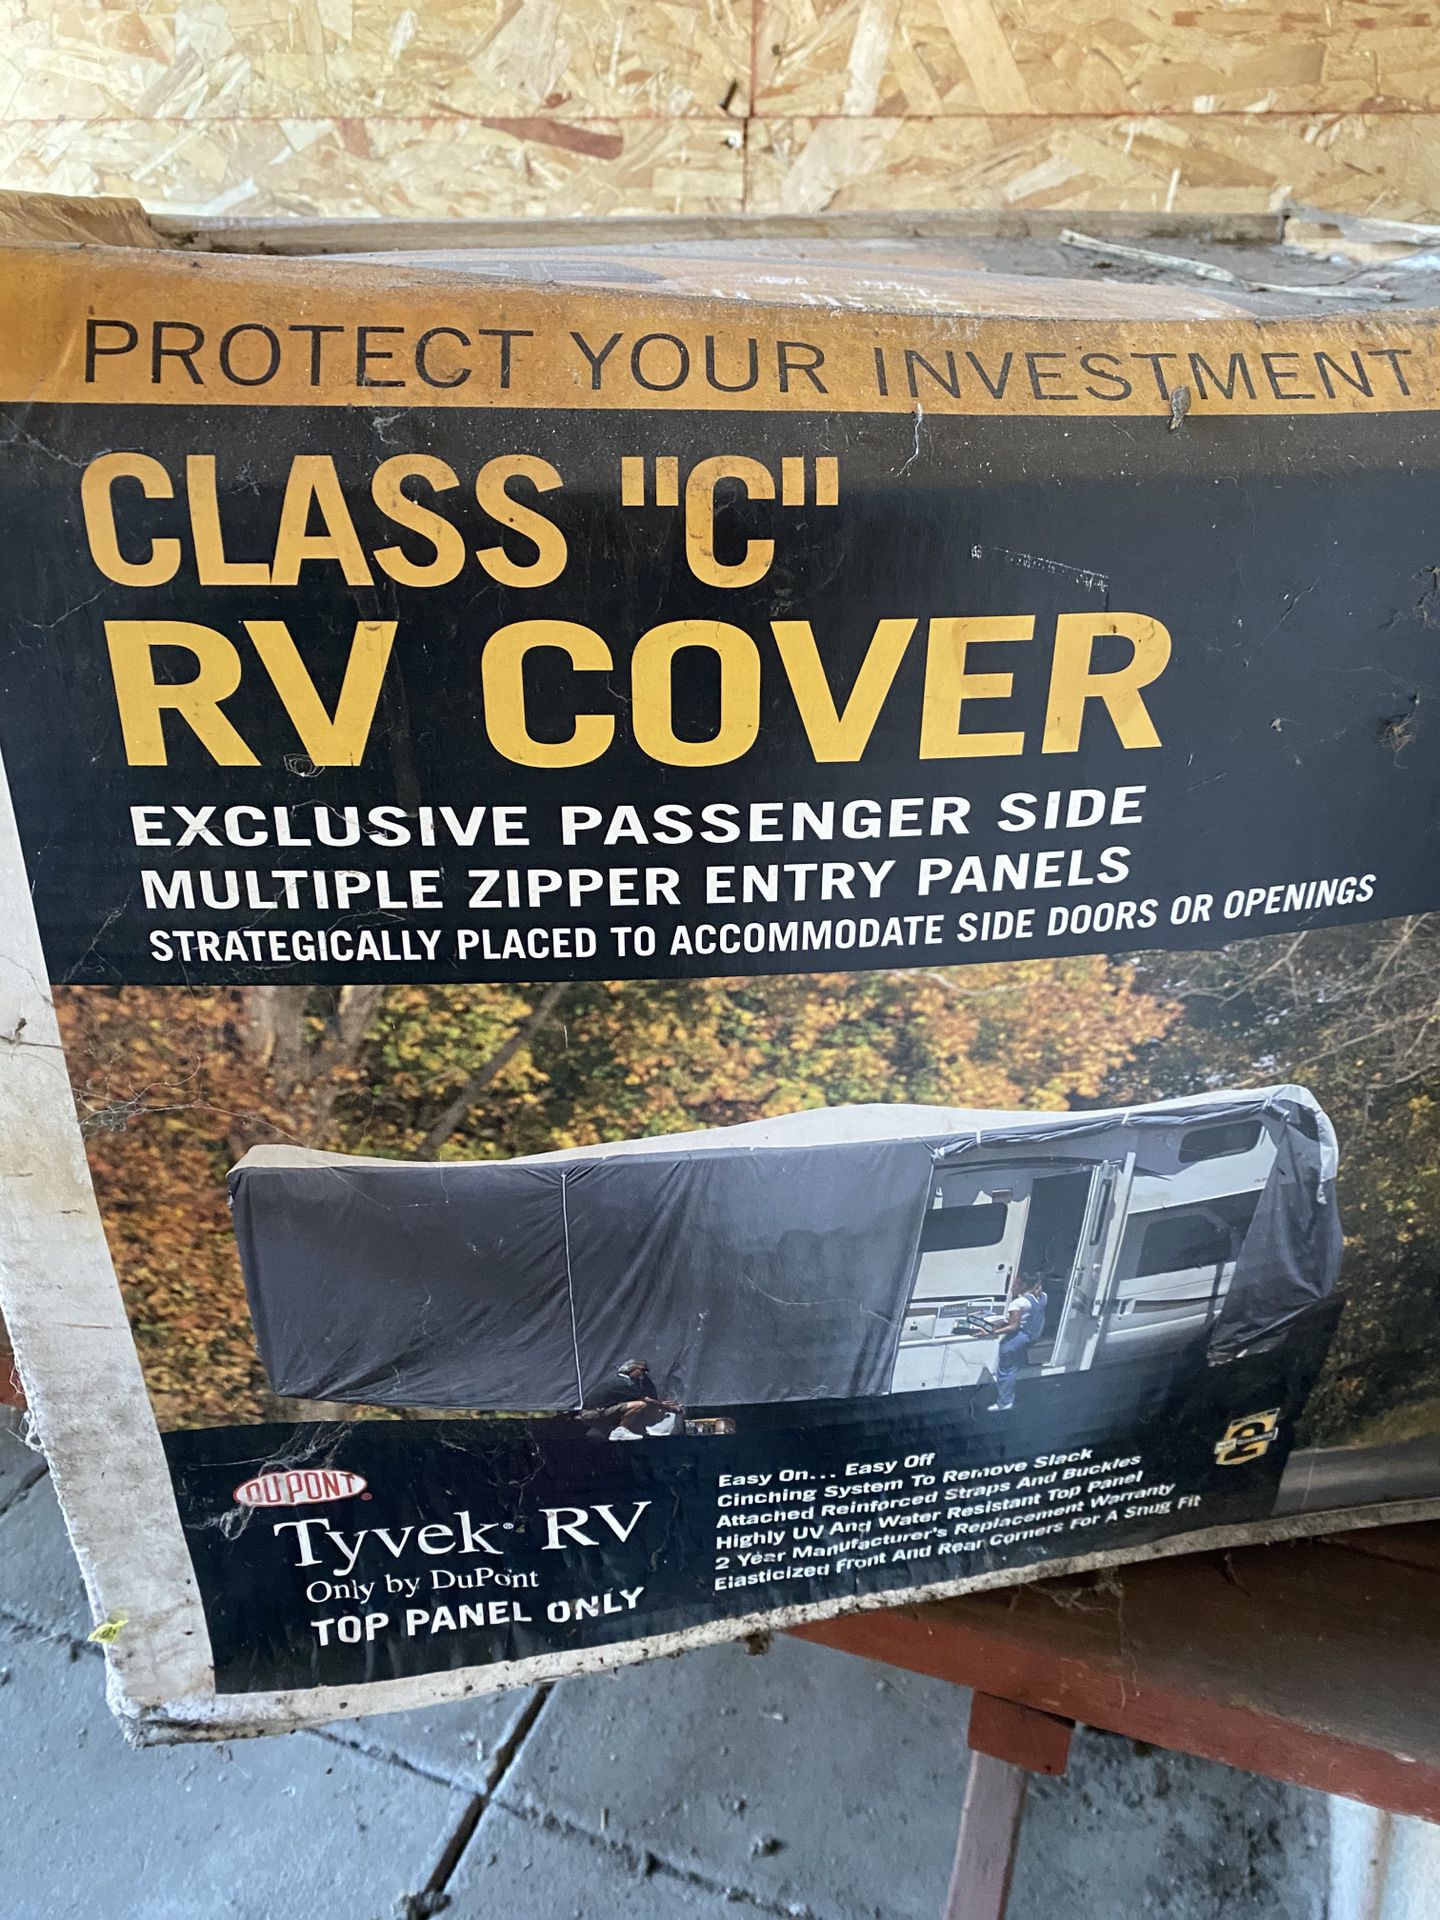 Class c RV cover cash and pick up only